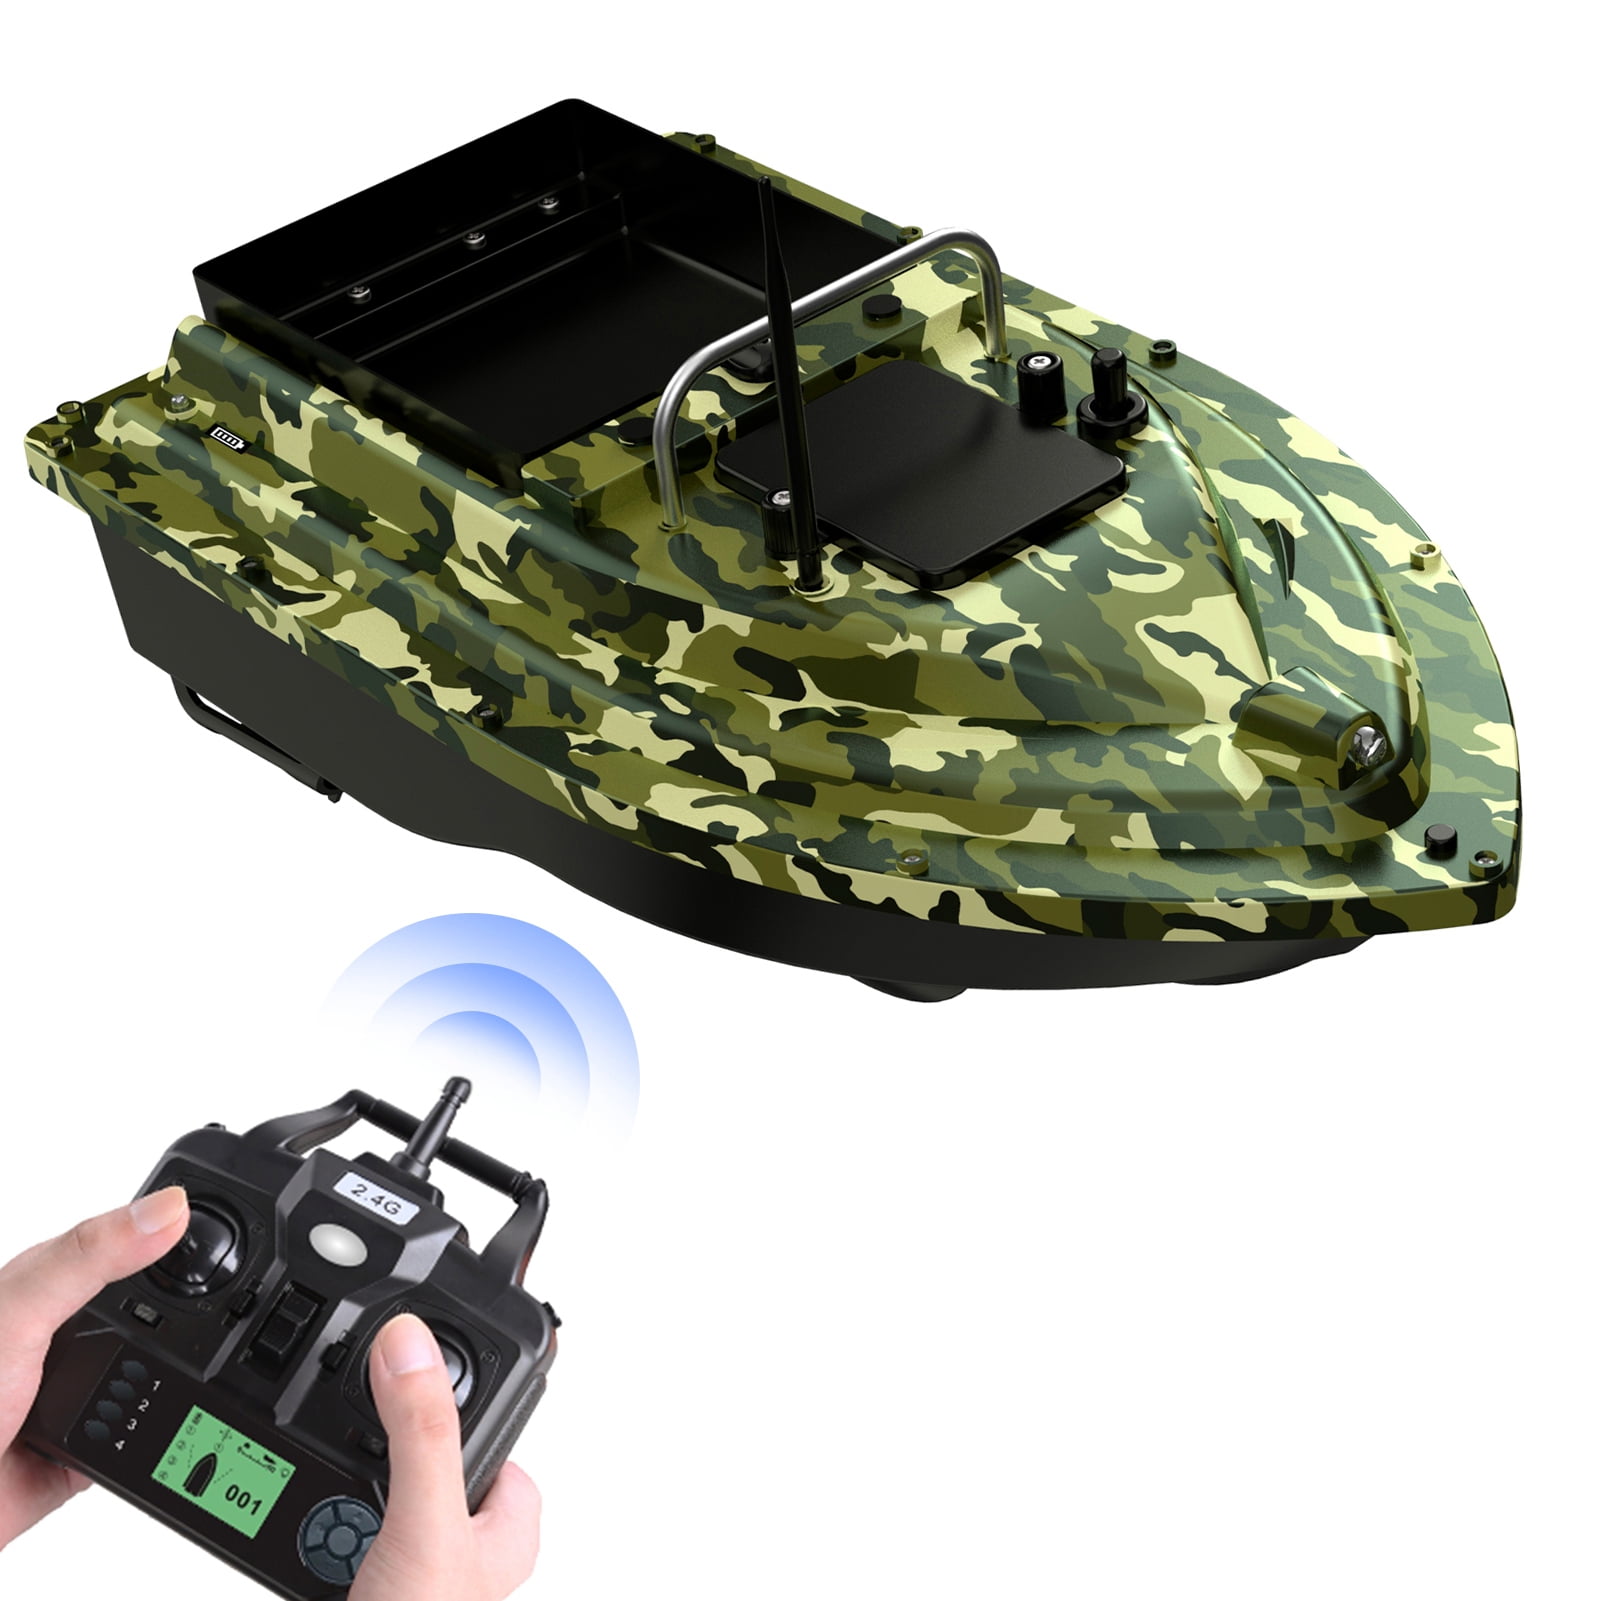 Dropship Fishing Boat OnBoard Surveillance GPS Tracking Device